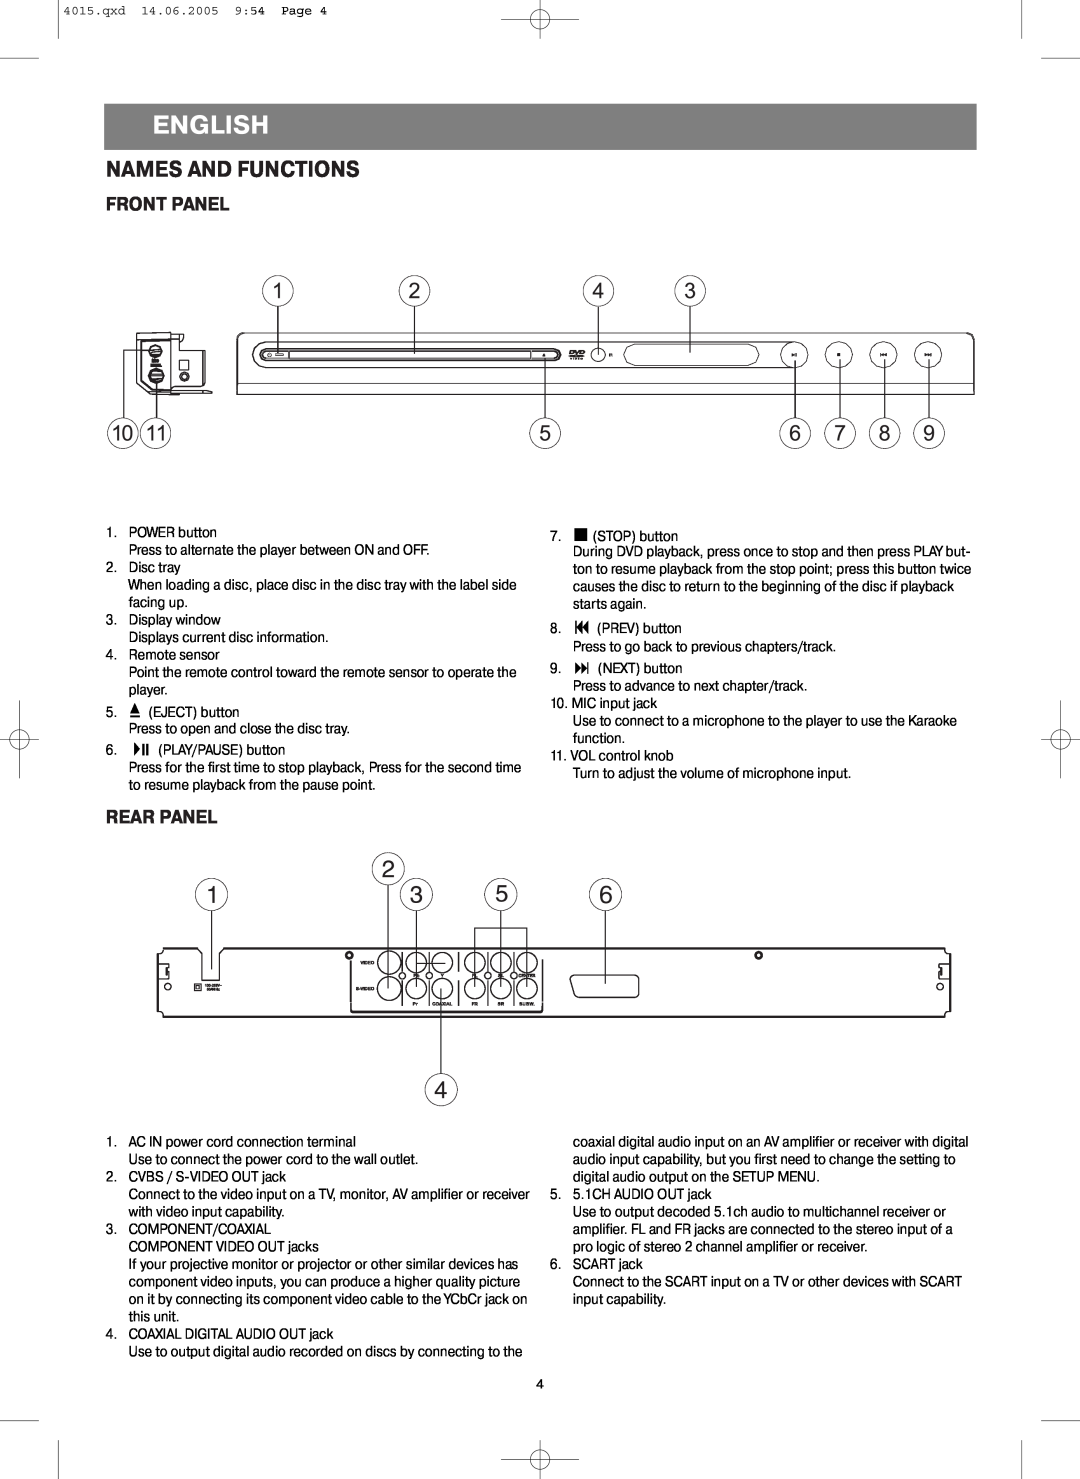 LG Electronics VT 4015 instruction manual Names And Functions, Front Panel, Rear Panel, English 